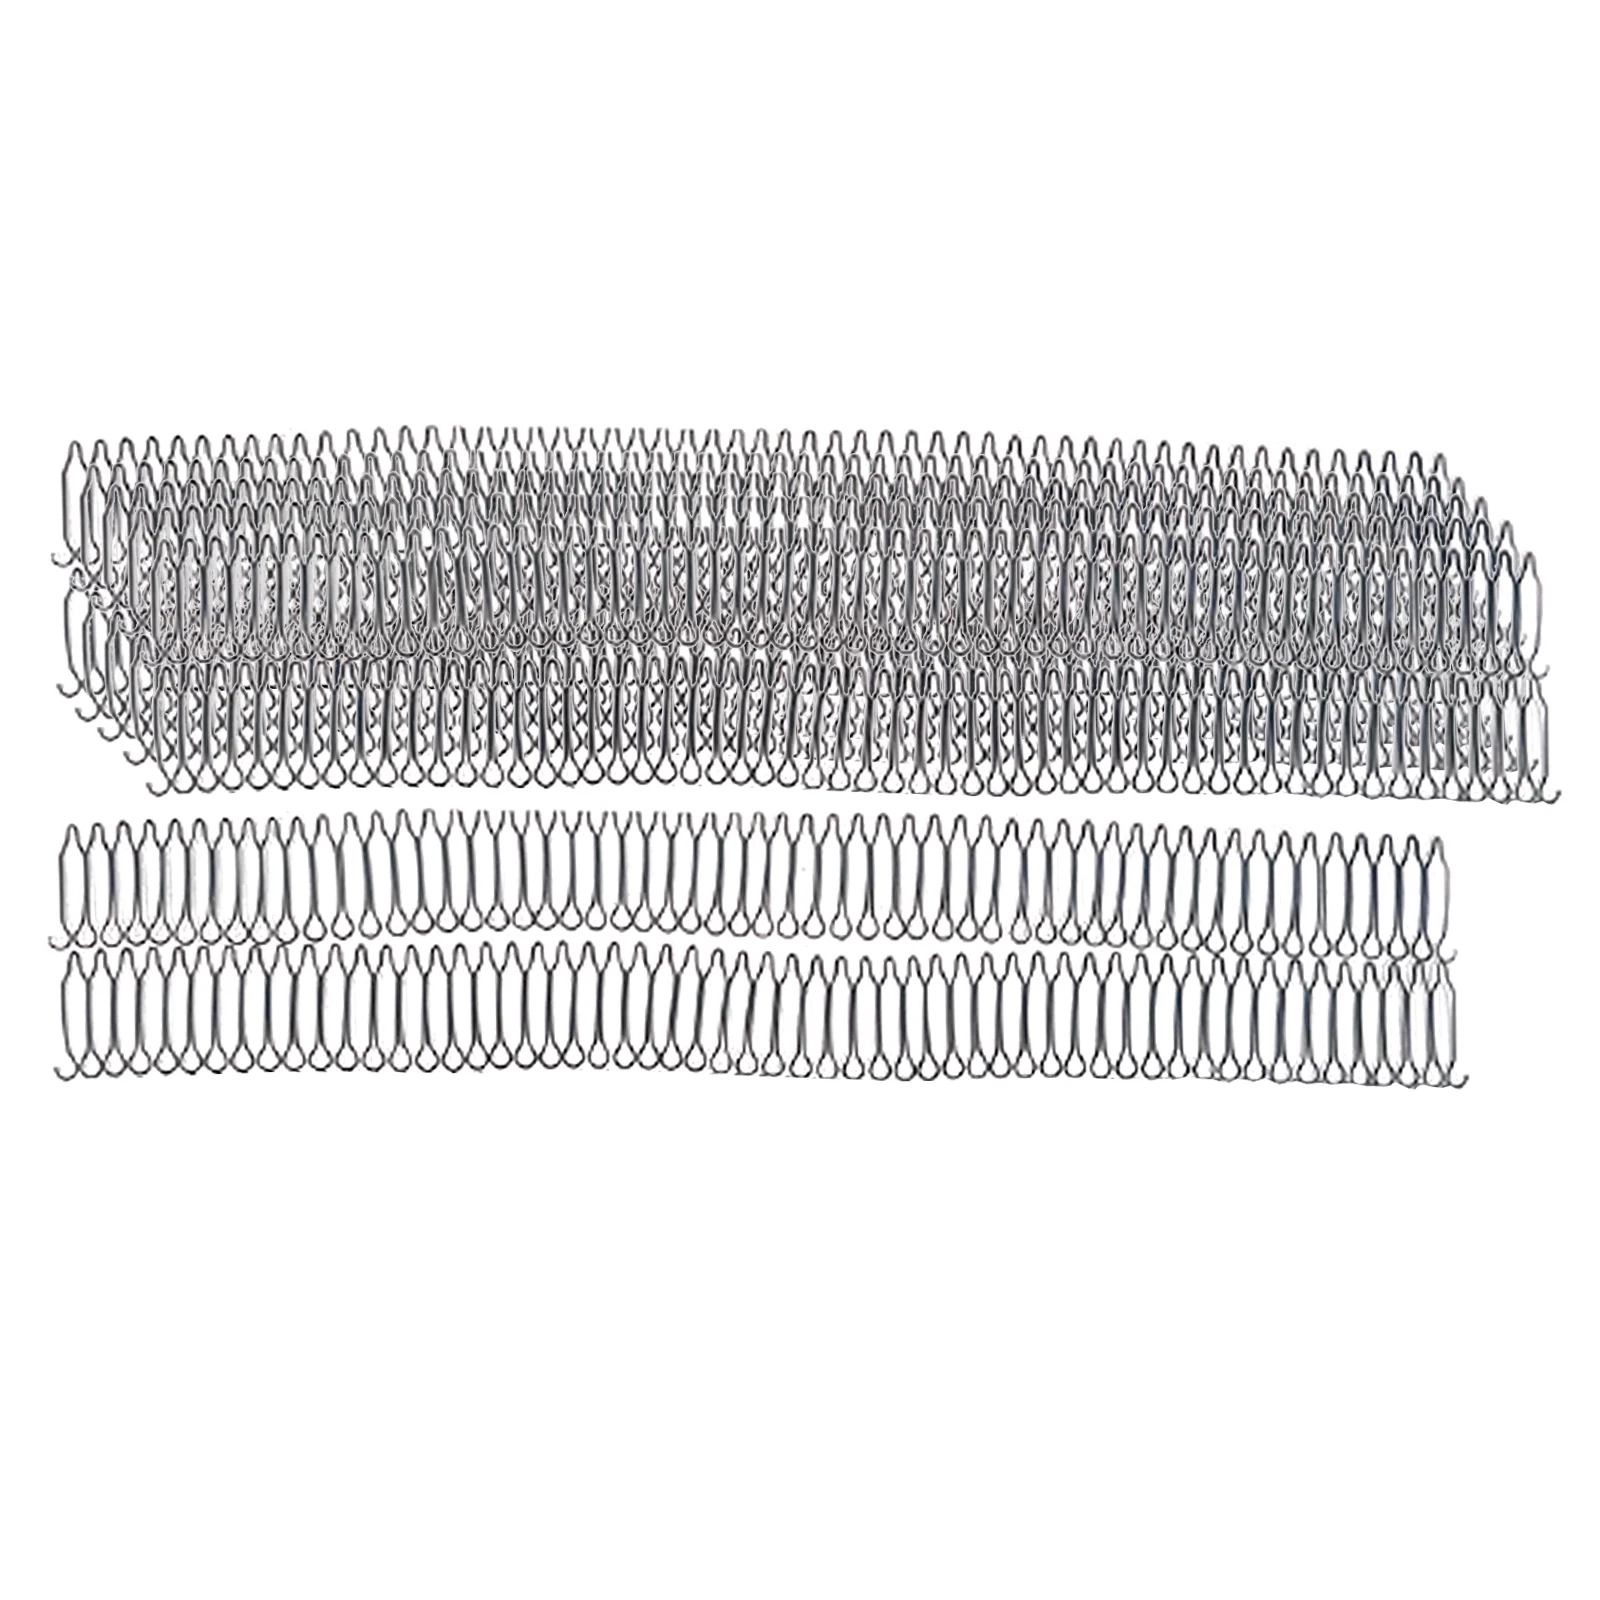 10Pcs Steel Clips Combs  Clips for Makings Hair Extensions Hairpiece Accessories Hair Caps Lace 